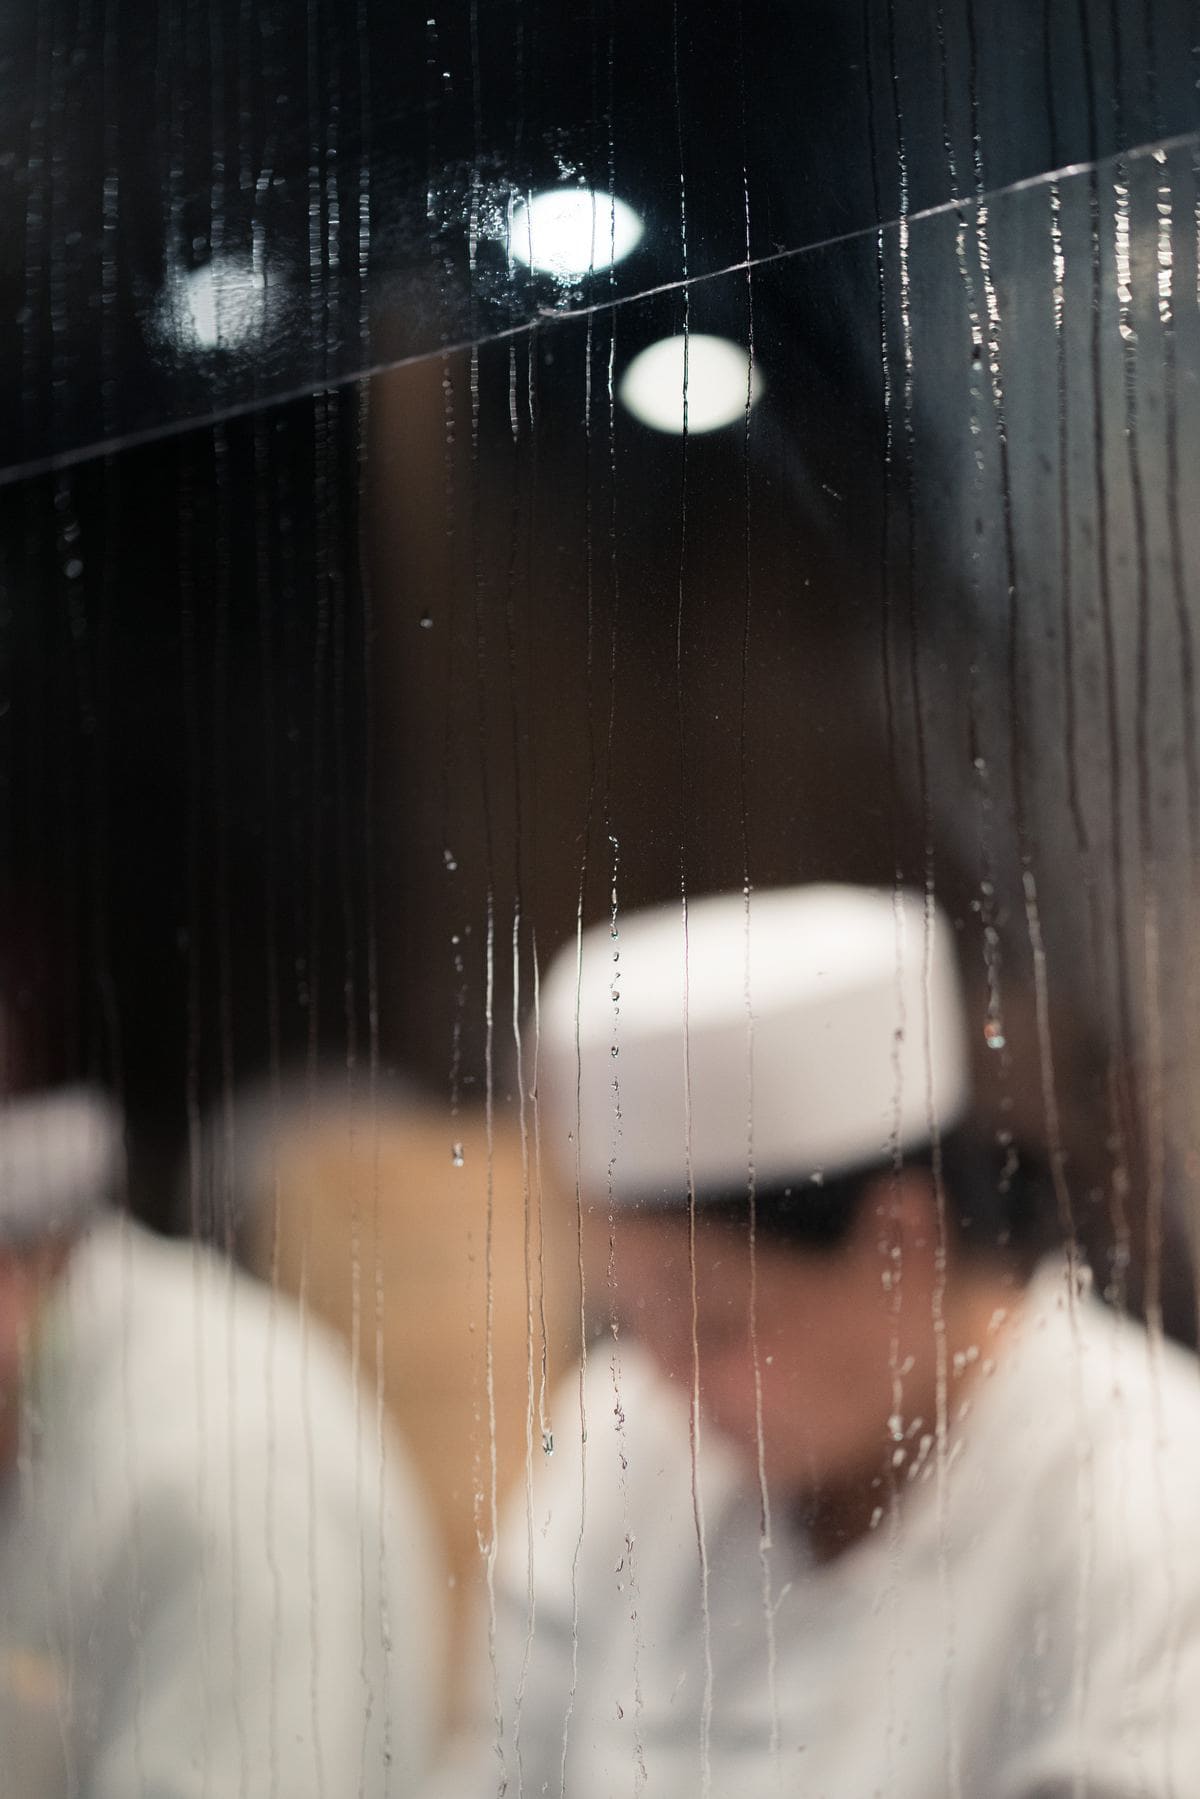 Chef working in front a window spattered with rain